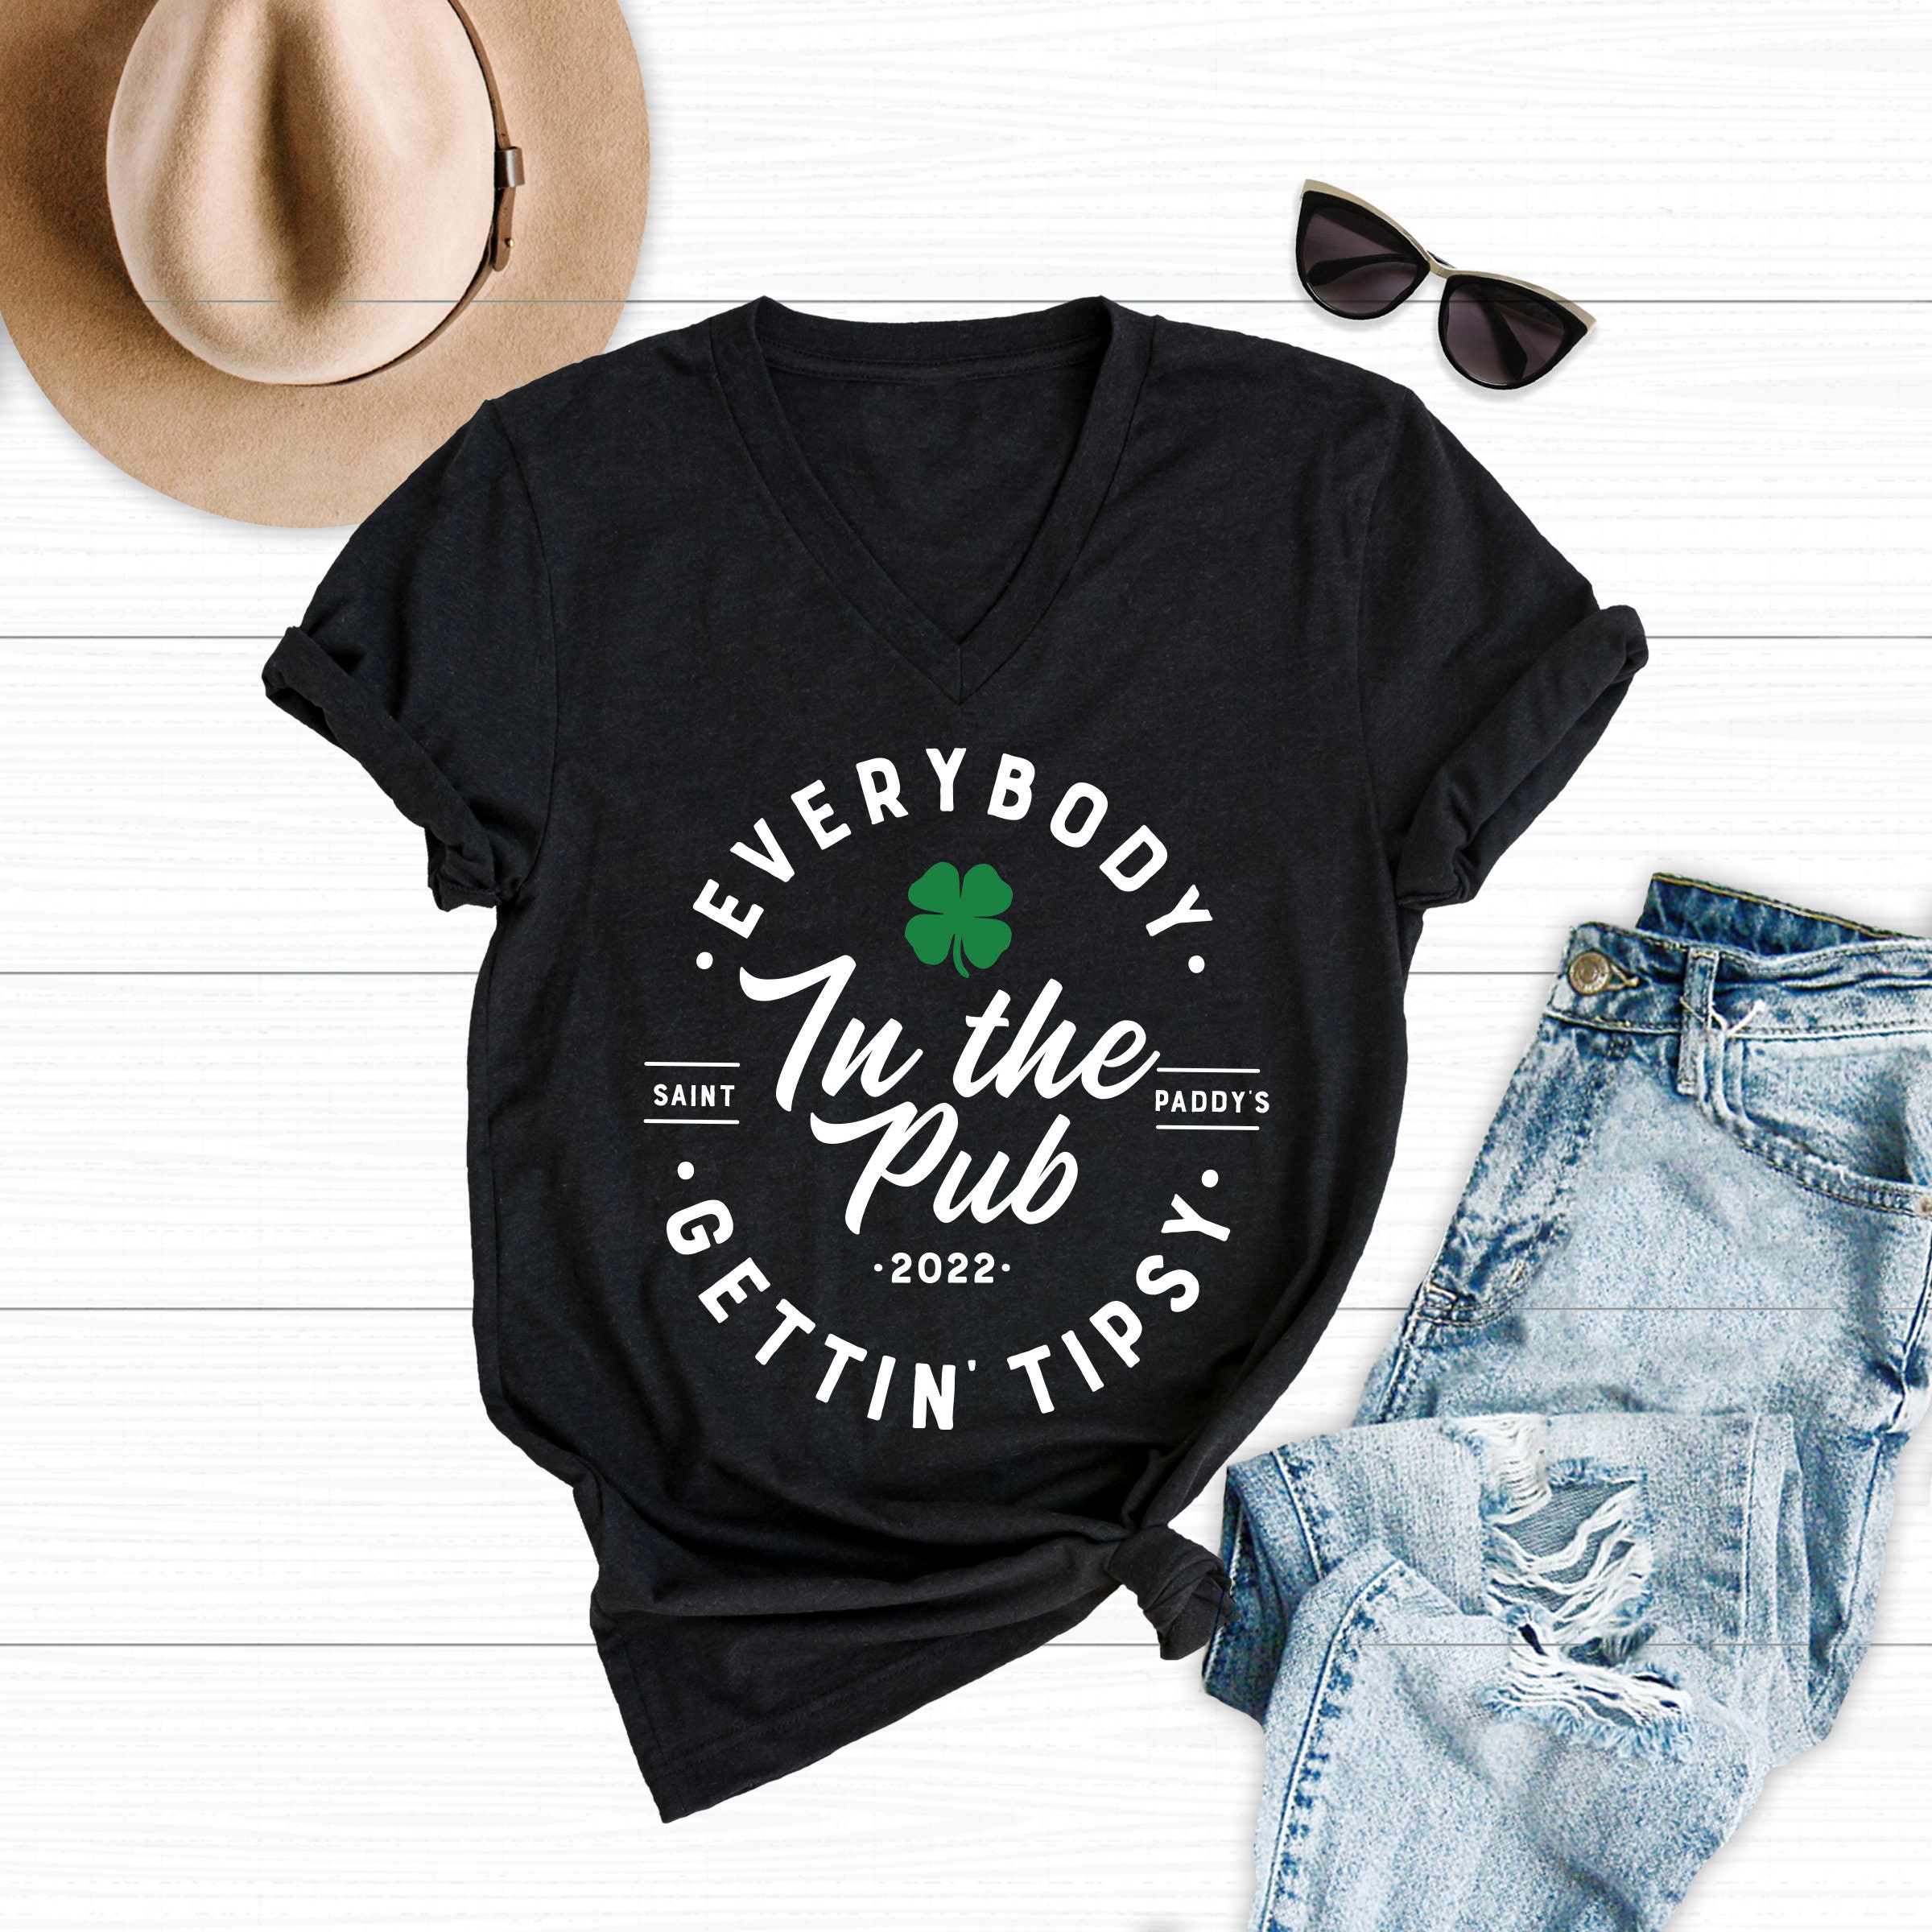 Bad and Boozy Everybody in the Pub Shirt St Pattys Day Gift St Patricks Day Shirt Lets Get Lucked Up Funny St Patricks Day Shirt